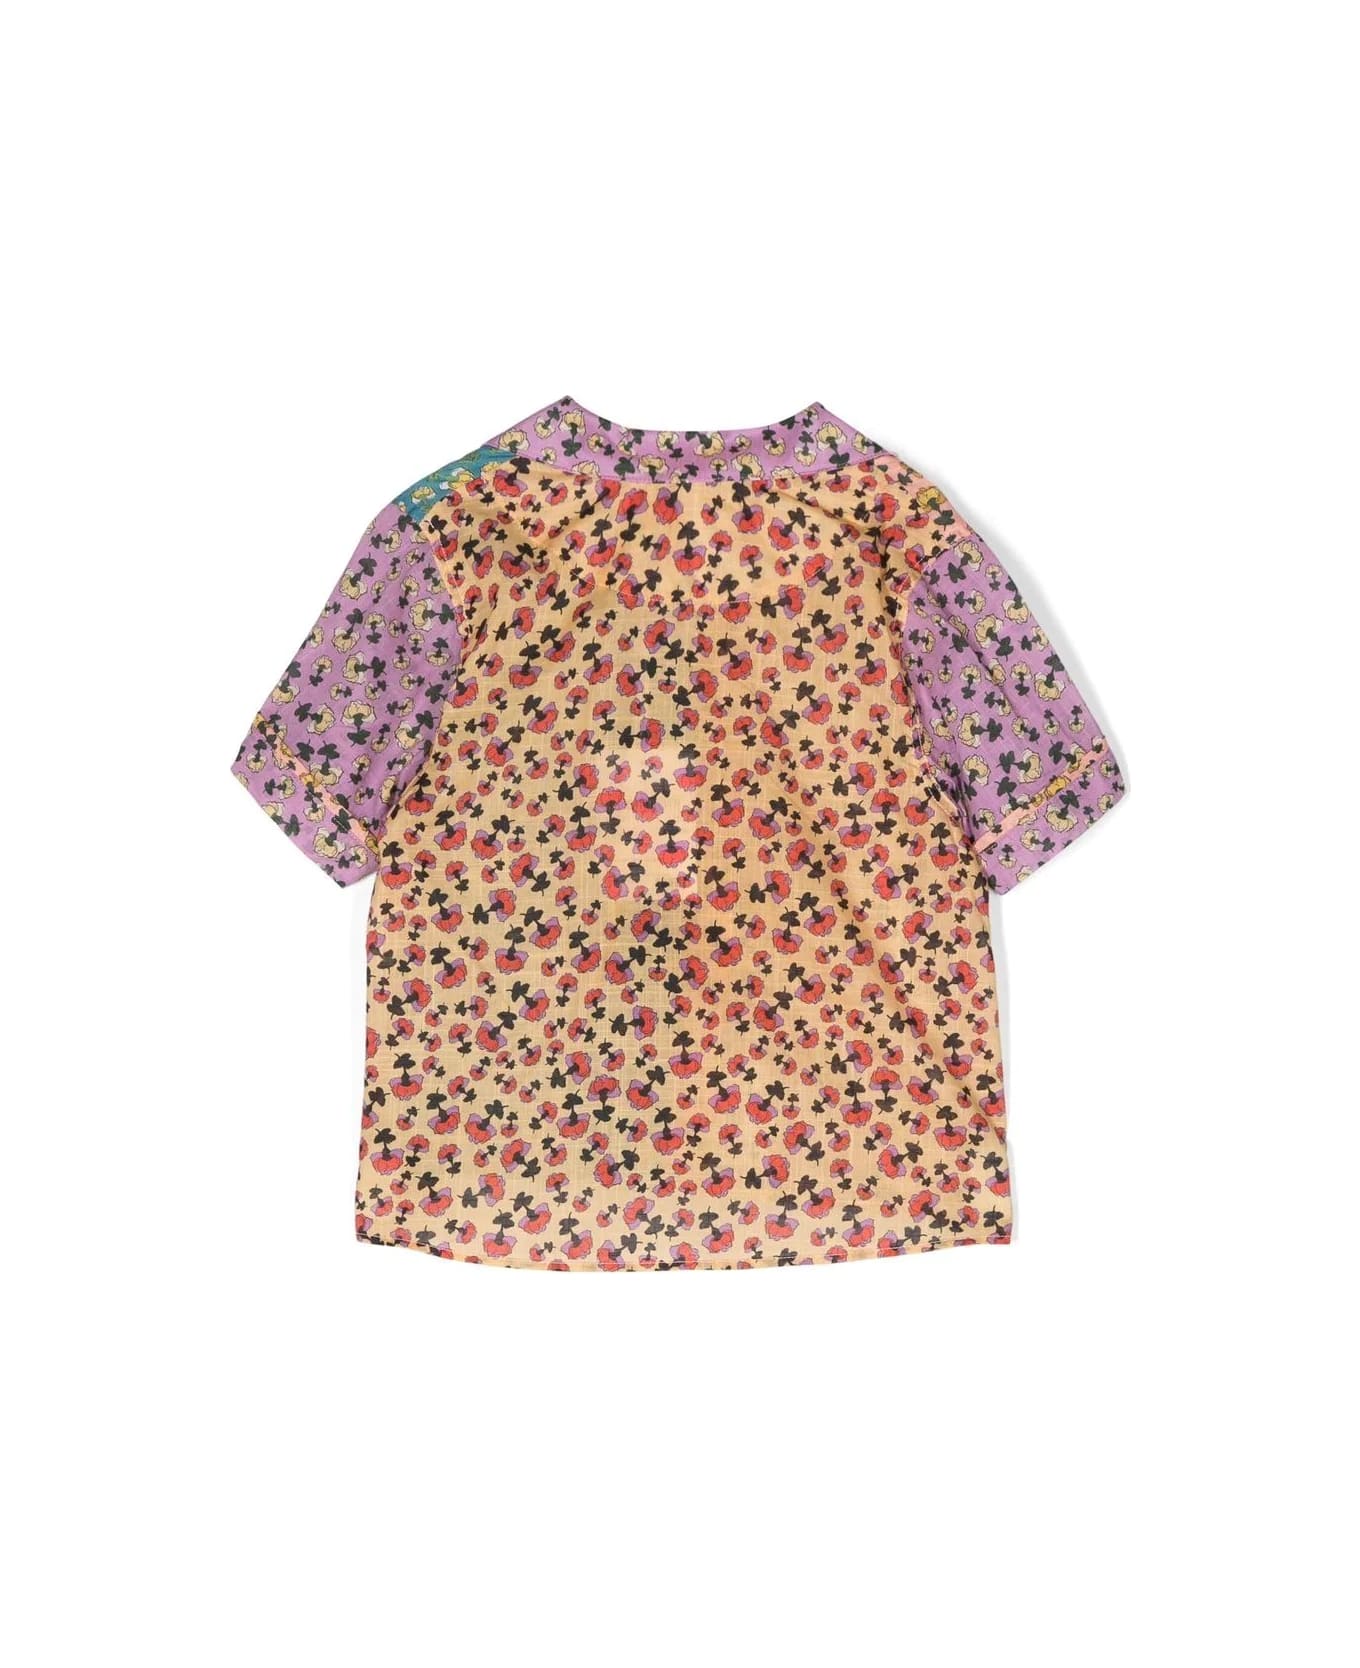 Zimmermann Shirt With Print - Multicolor シャツ